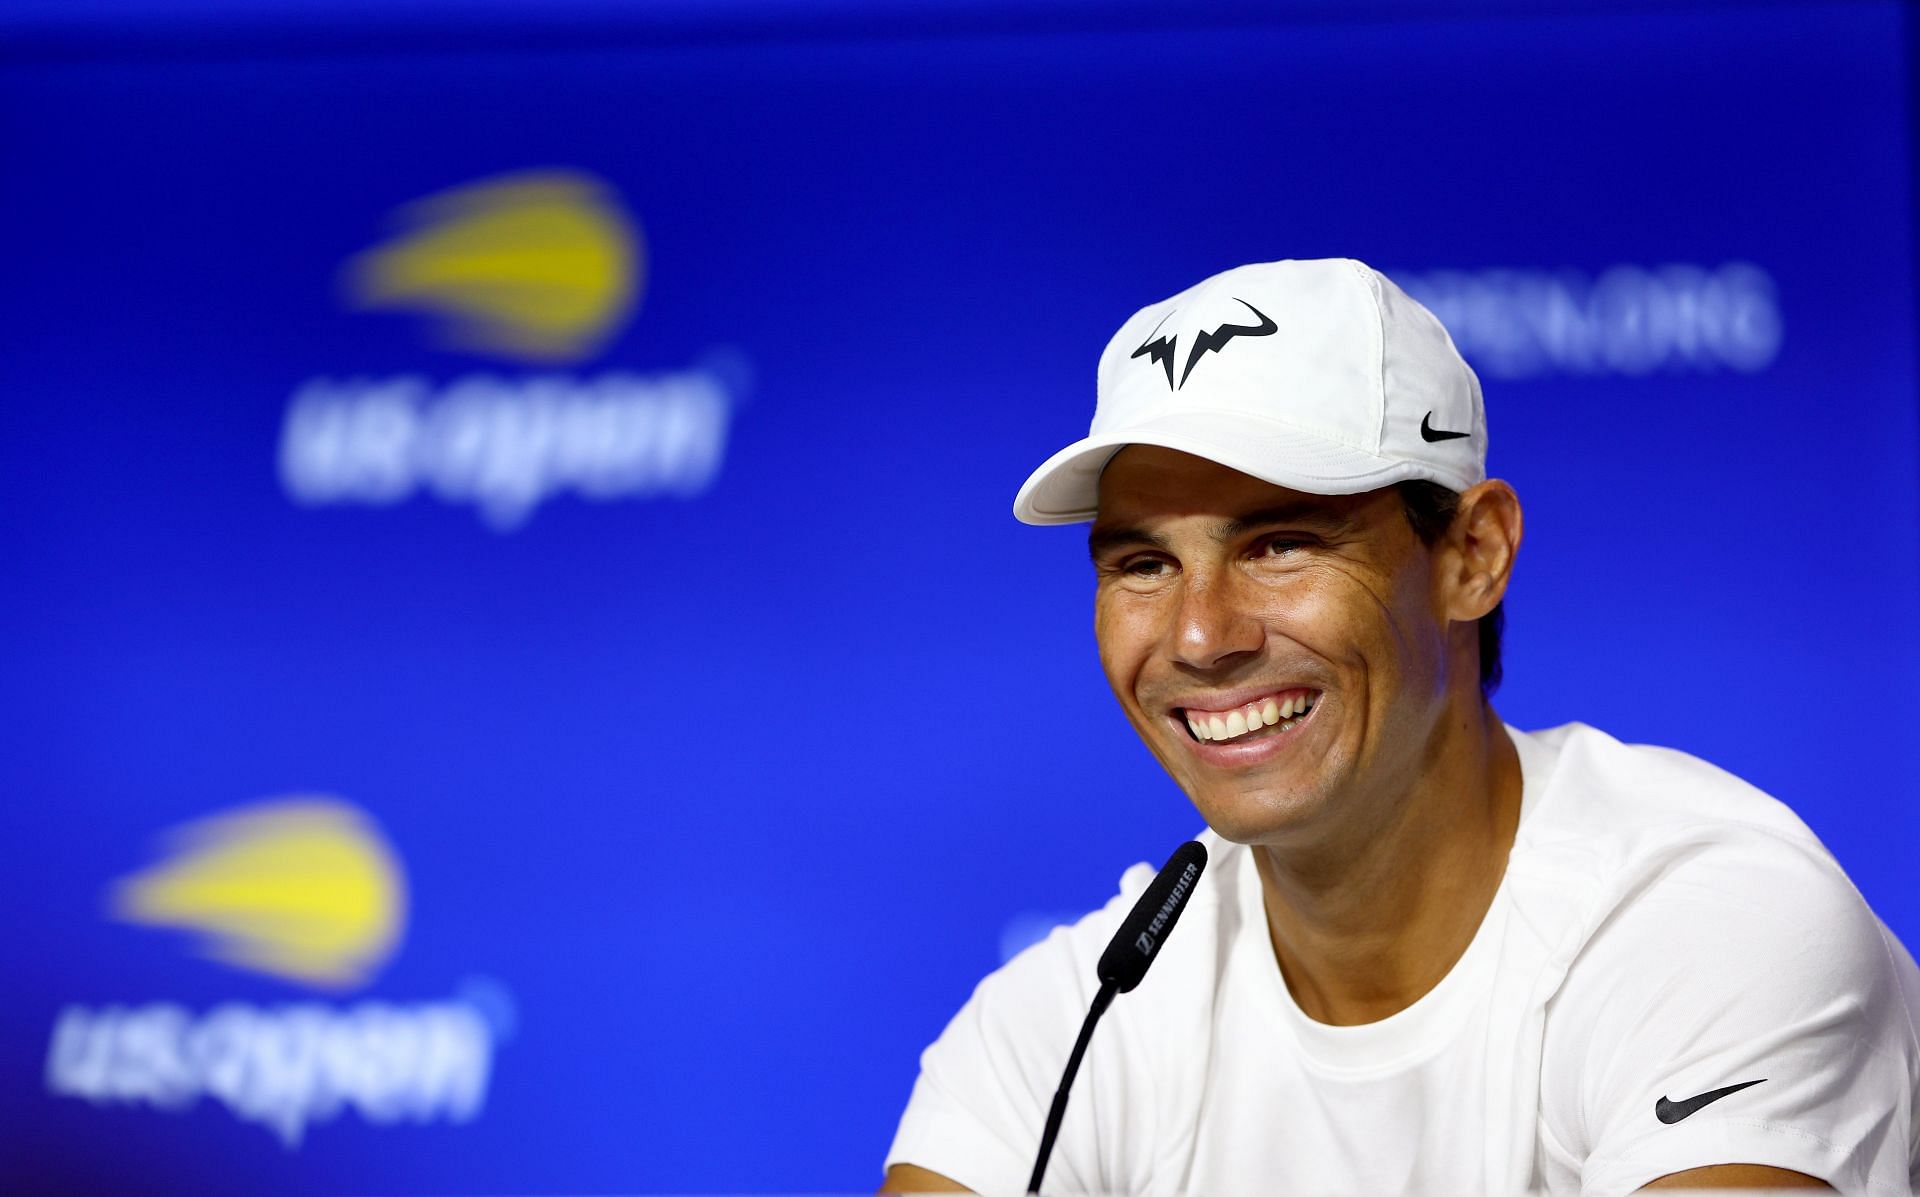 Rafael Nadal smiles during a press conference ahead of the US Open